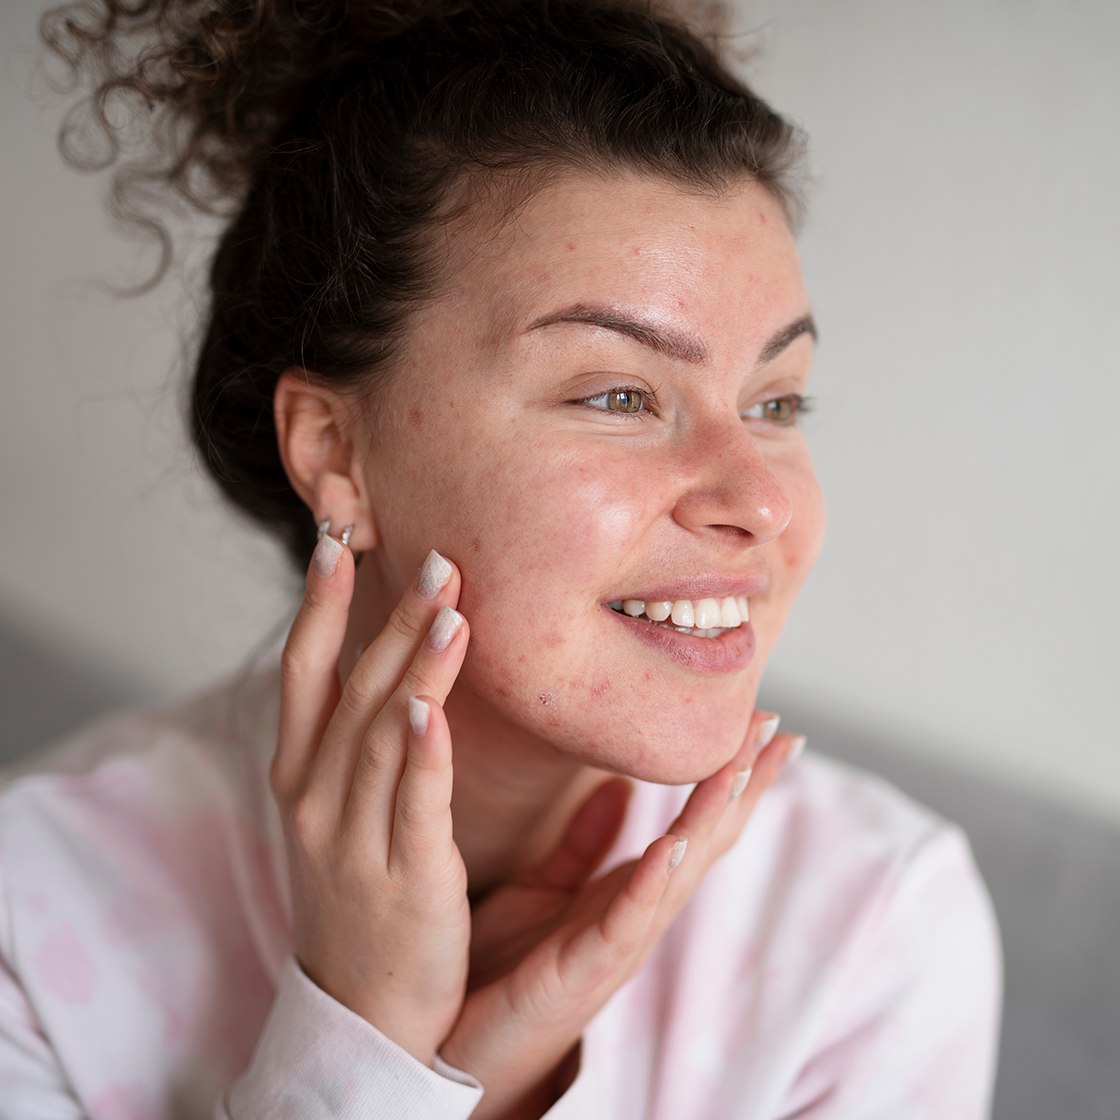 Acne scars: causes and how to prevent & manage